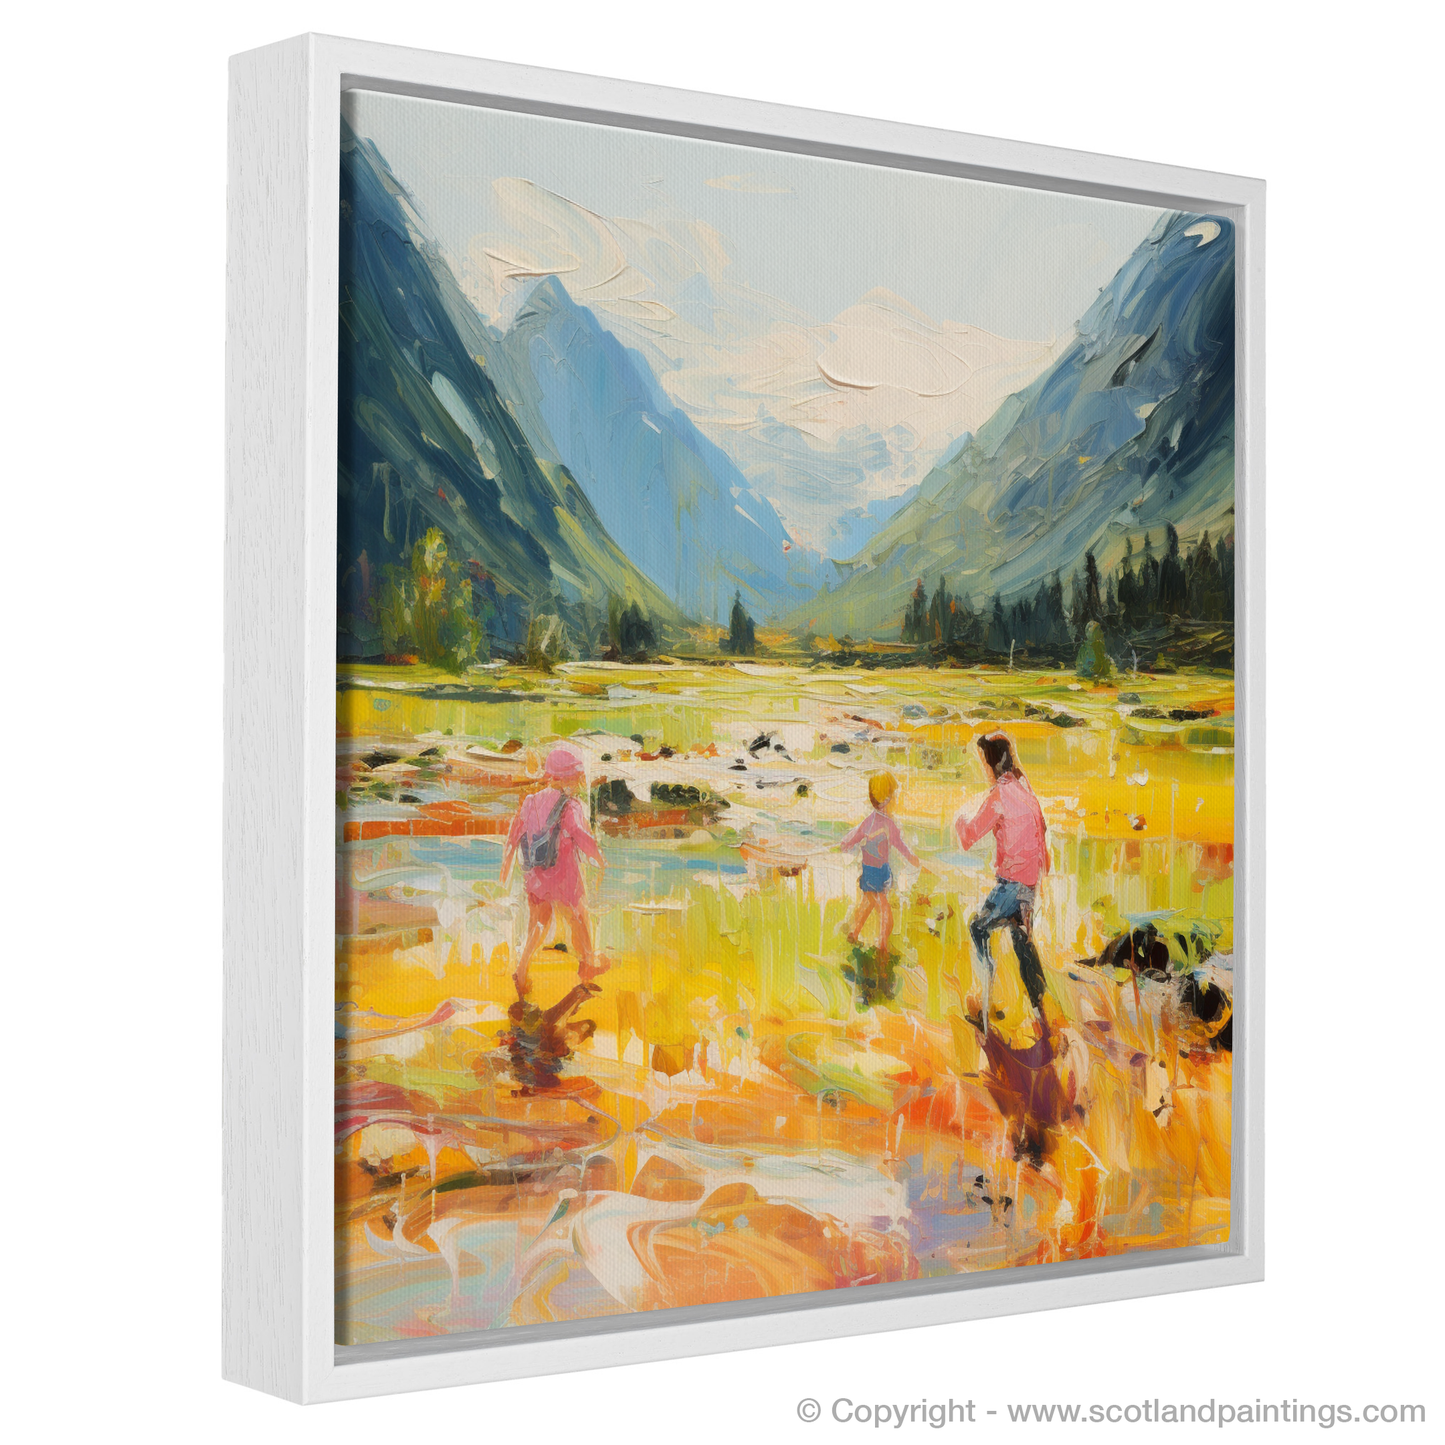 Painting and Art Print of Children playing in Glencoe during summer entitled "Summer Frolic in Glencoe Valley".